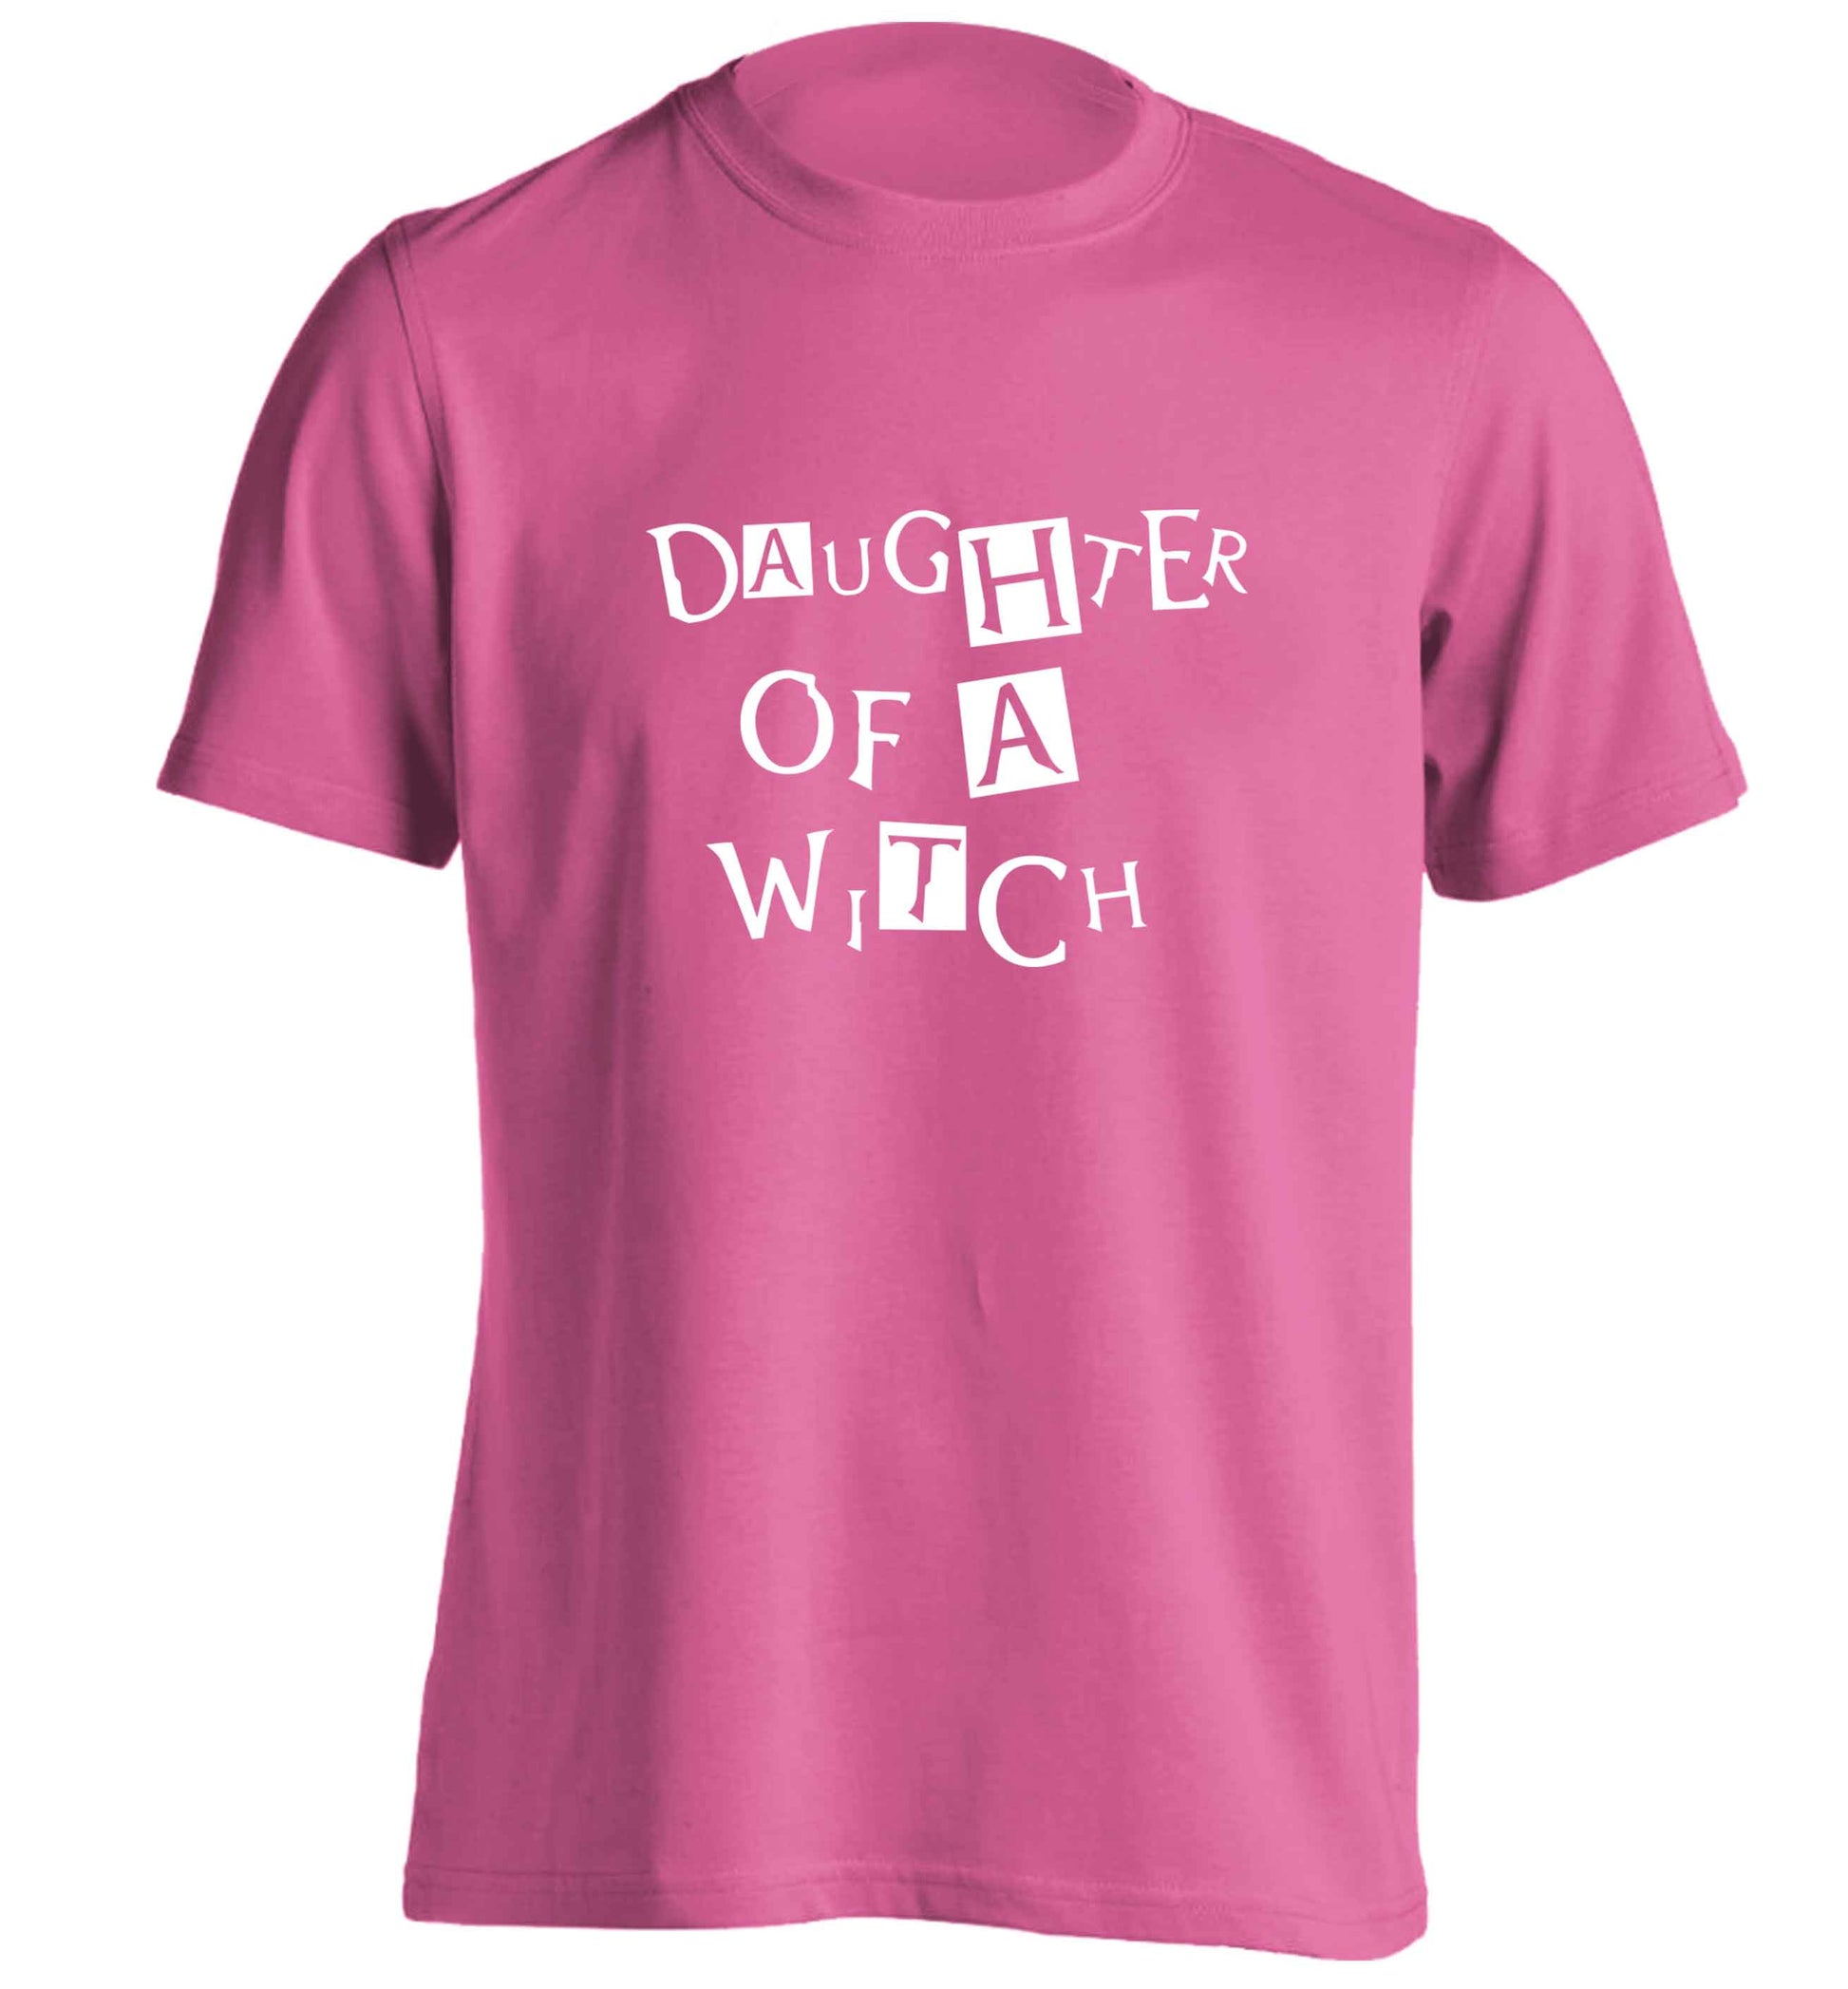 Daughter of a witch adults unisex pink Tshirt 2XL